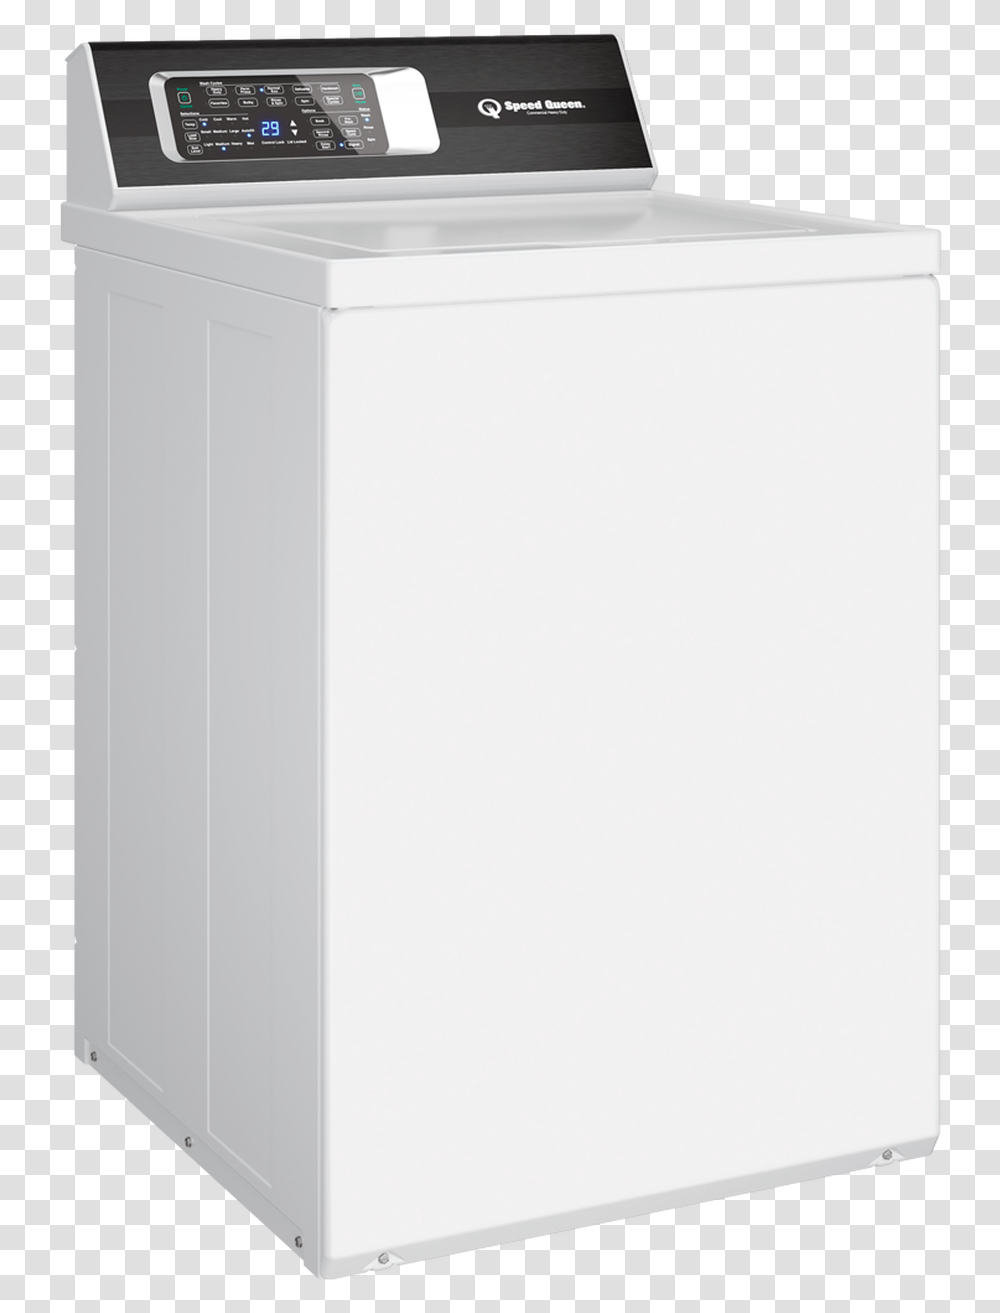 Speed Queen, Washer, Appliance, Dryer Transparent Png